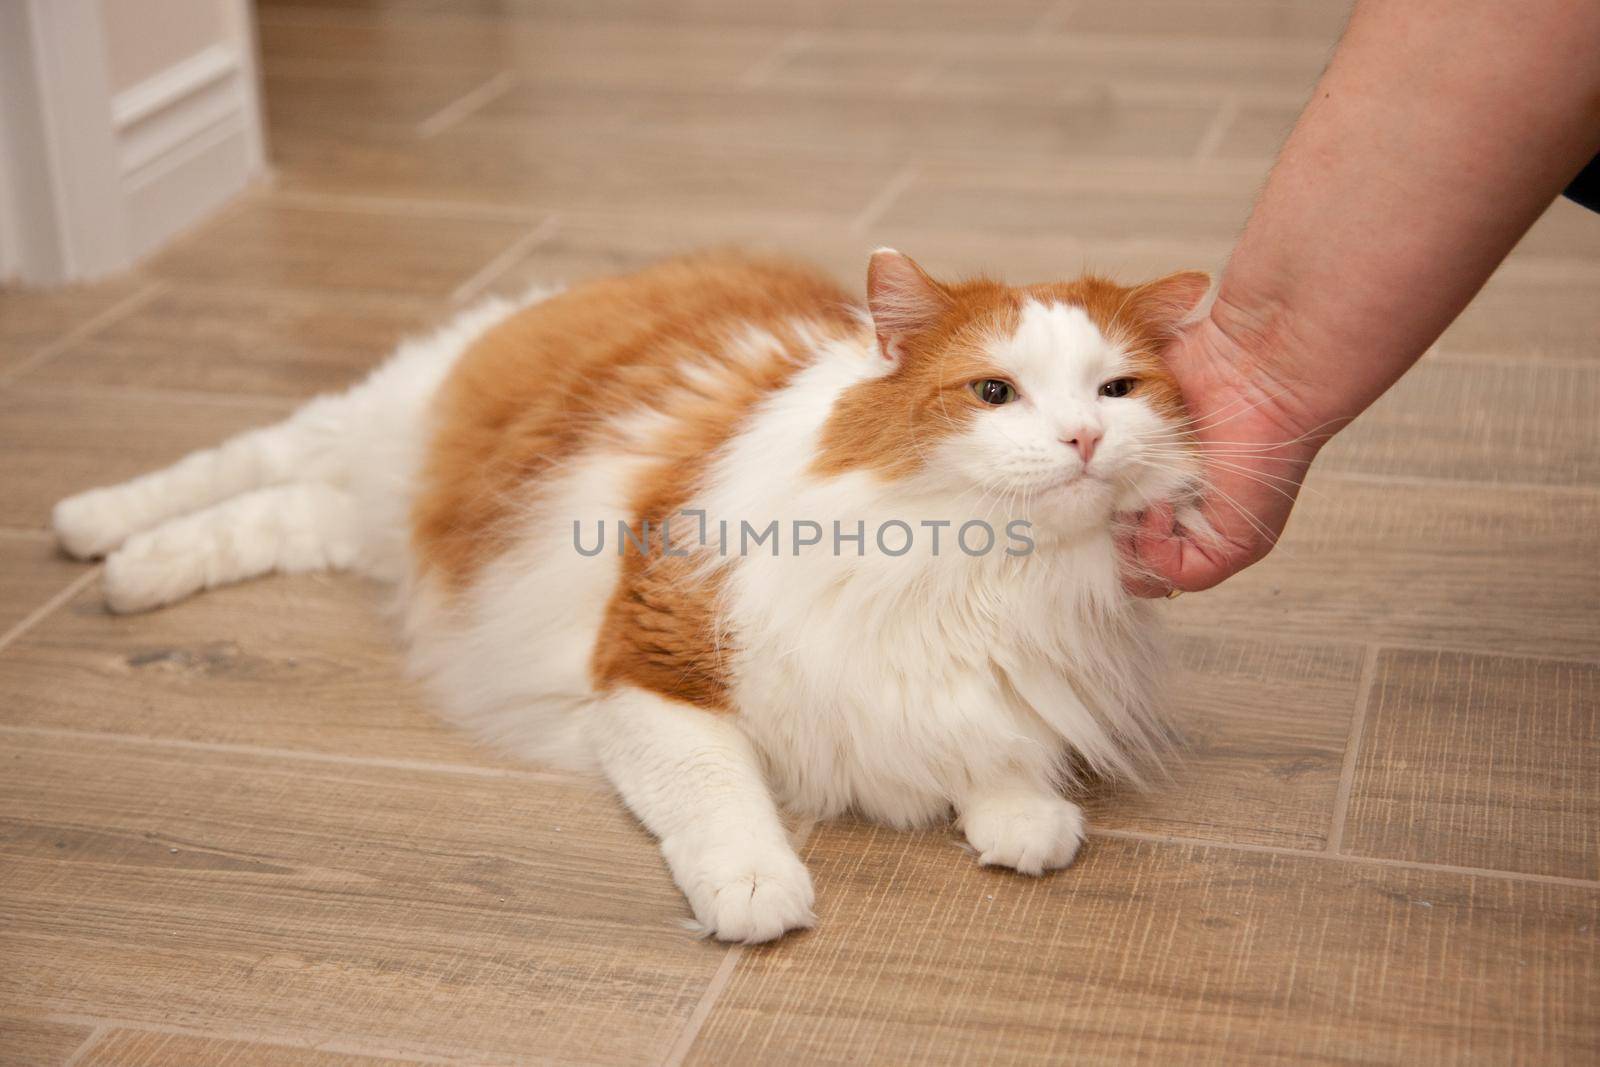 An orange and white cat allows its owner to stroke its fur